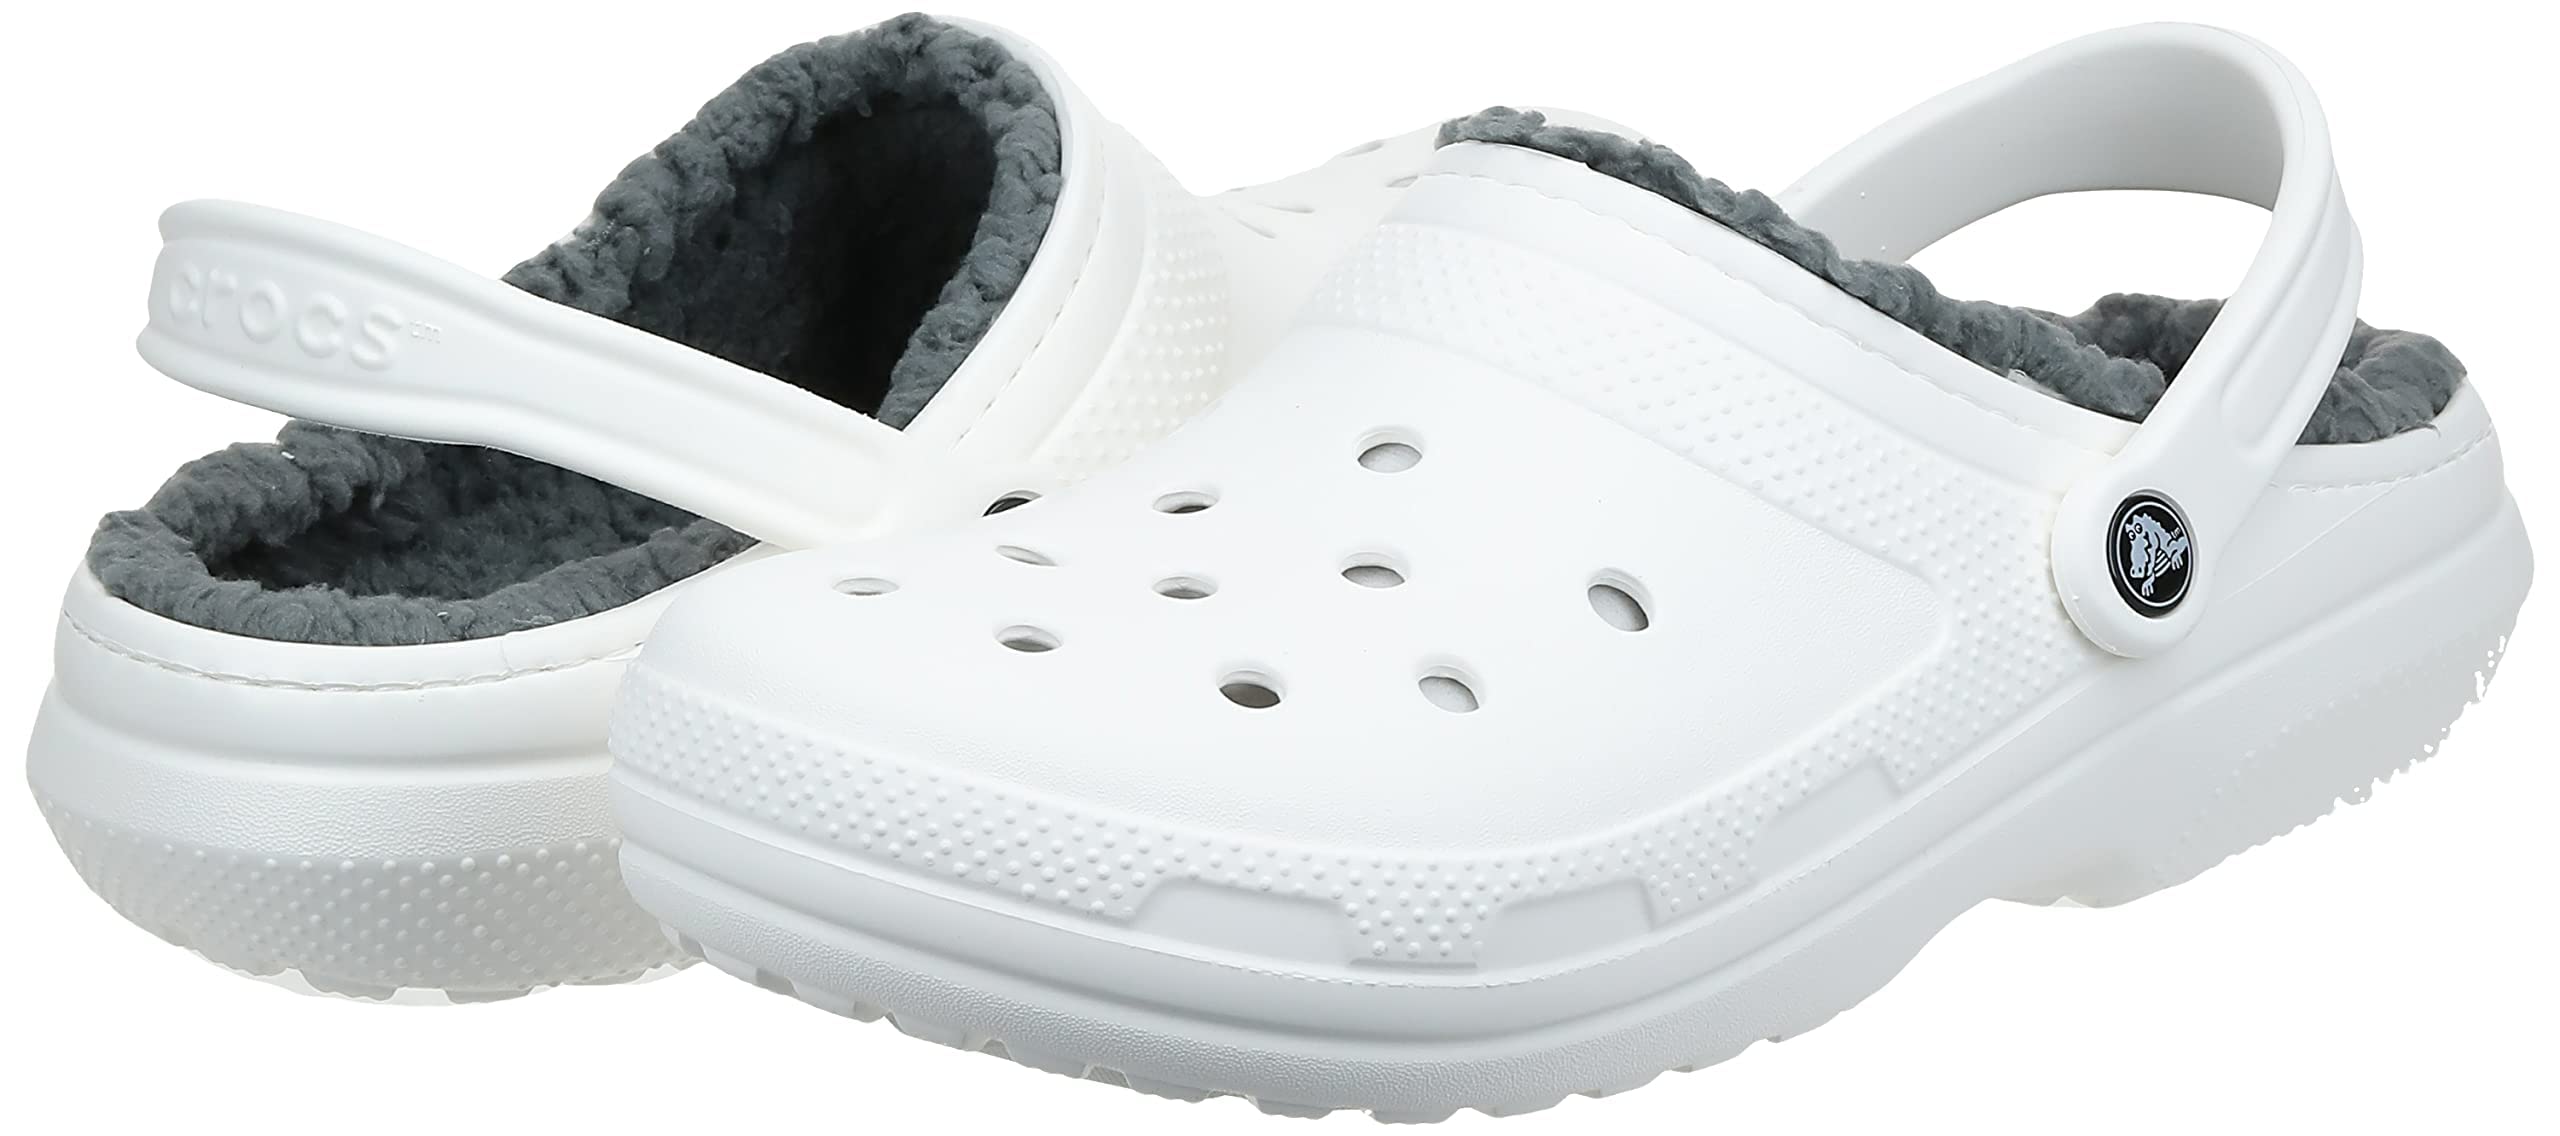 Crocs Unisex-Adult Men's and Women's Classic Lined Clog | Fuzzy Slippers